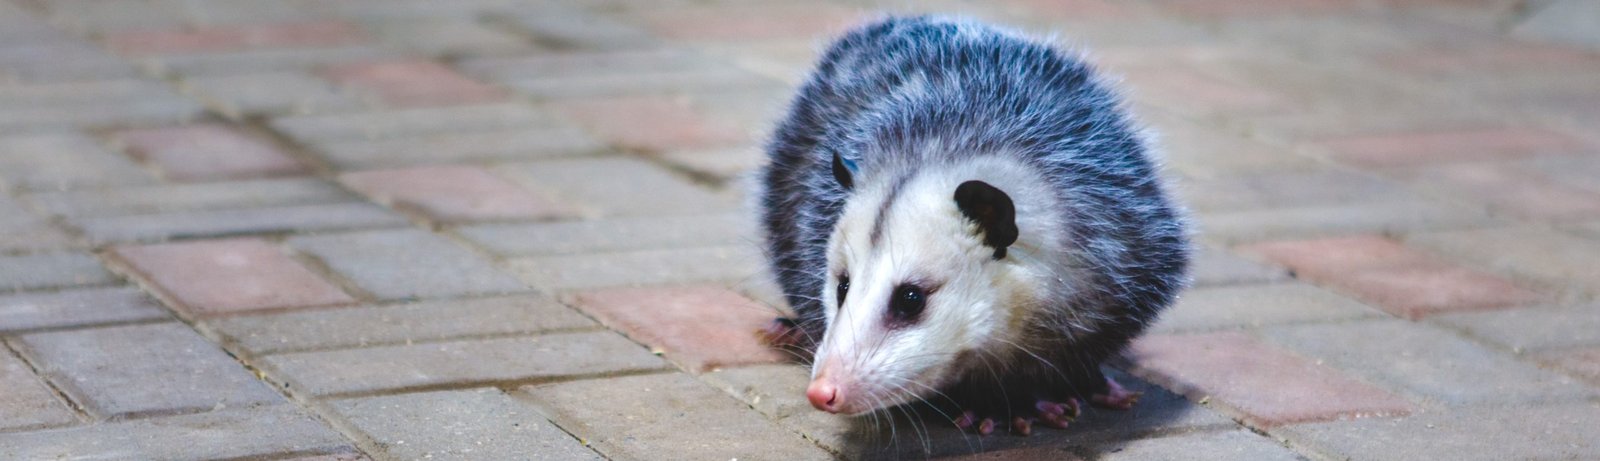 Picture of opossum on street